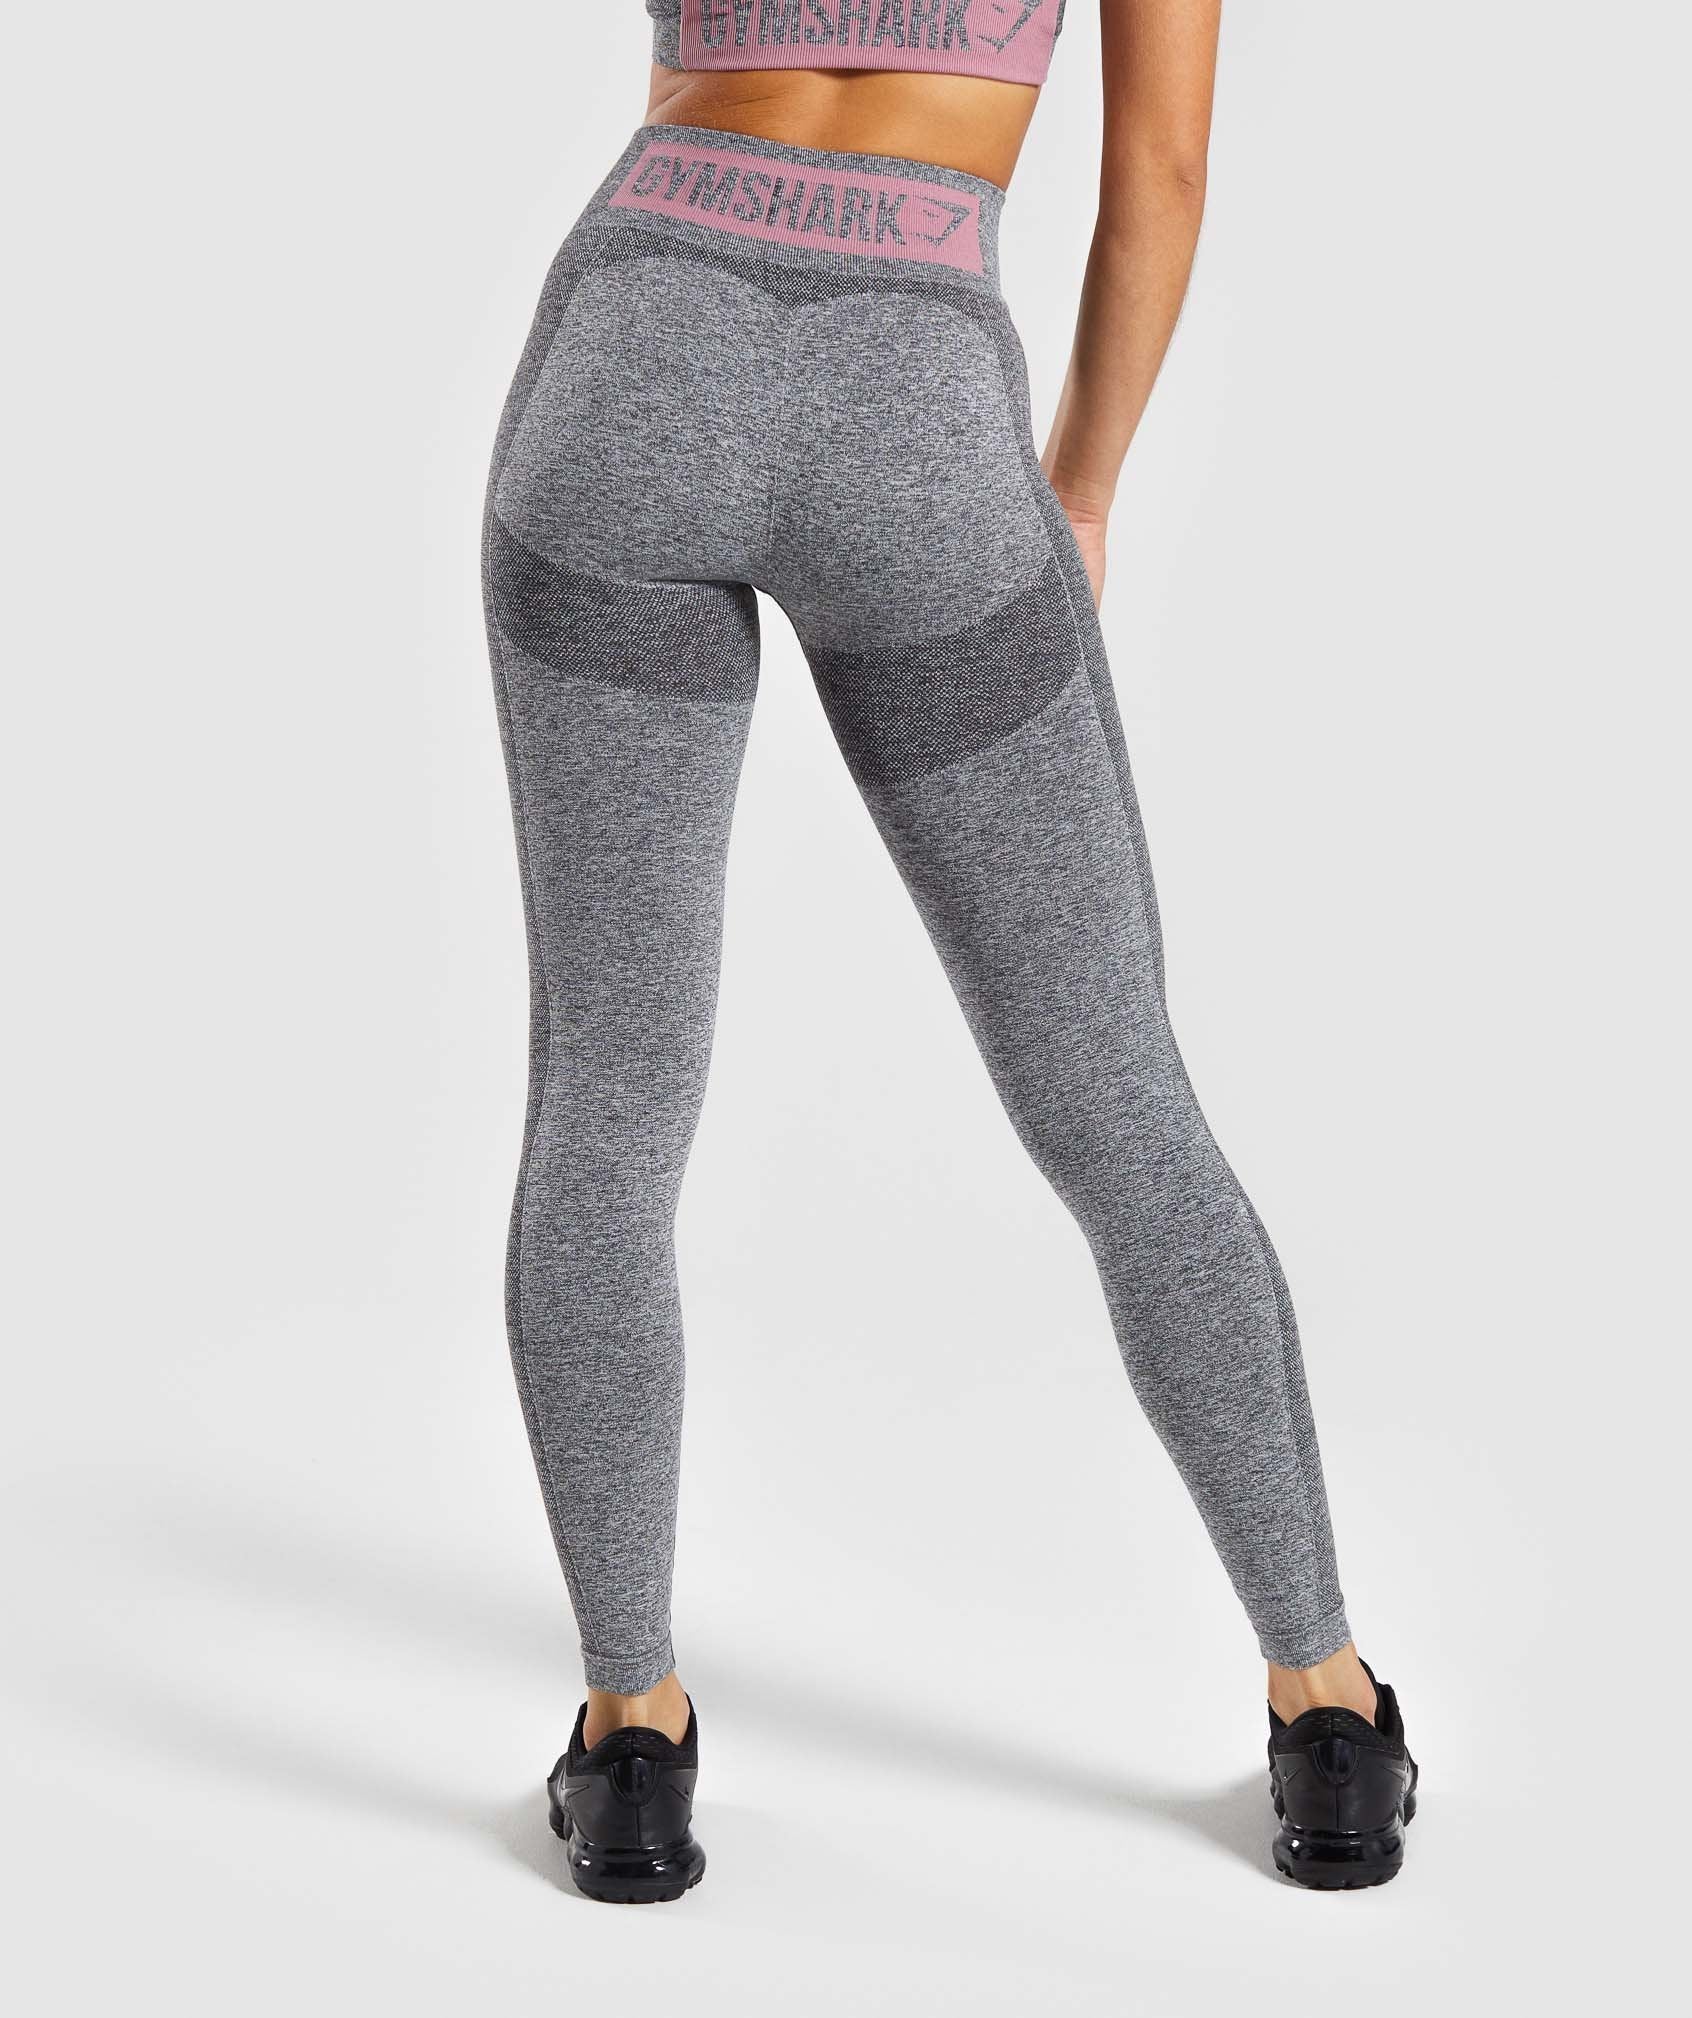 Gymshark, Pants & Jumpsuits, Brand New Gymshark Fit Mid Rise Leggings  Charcoalpink Size Small